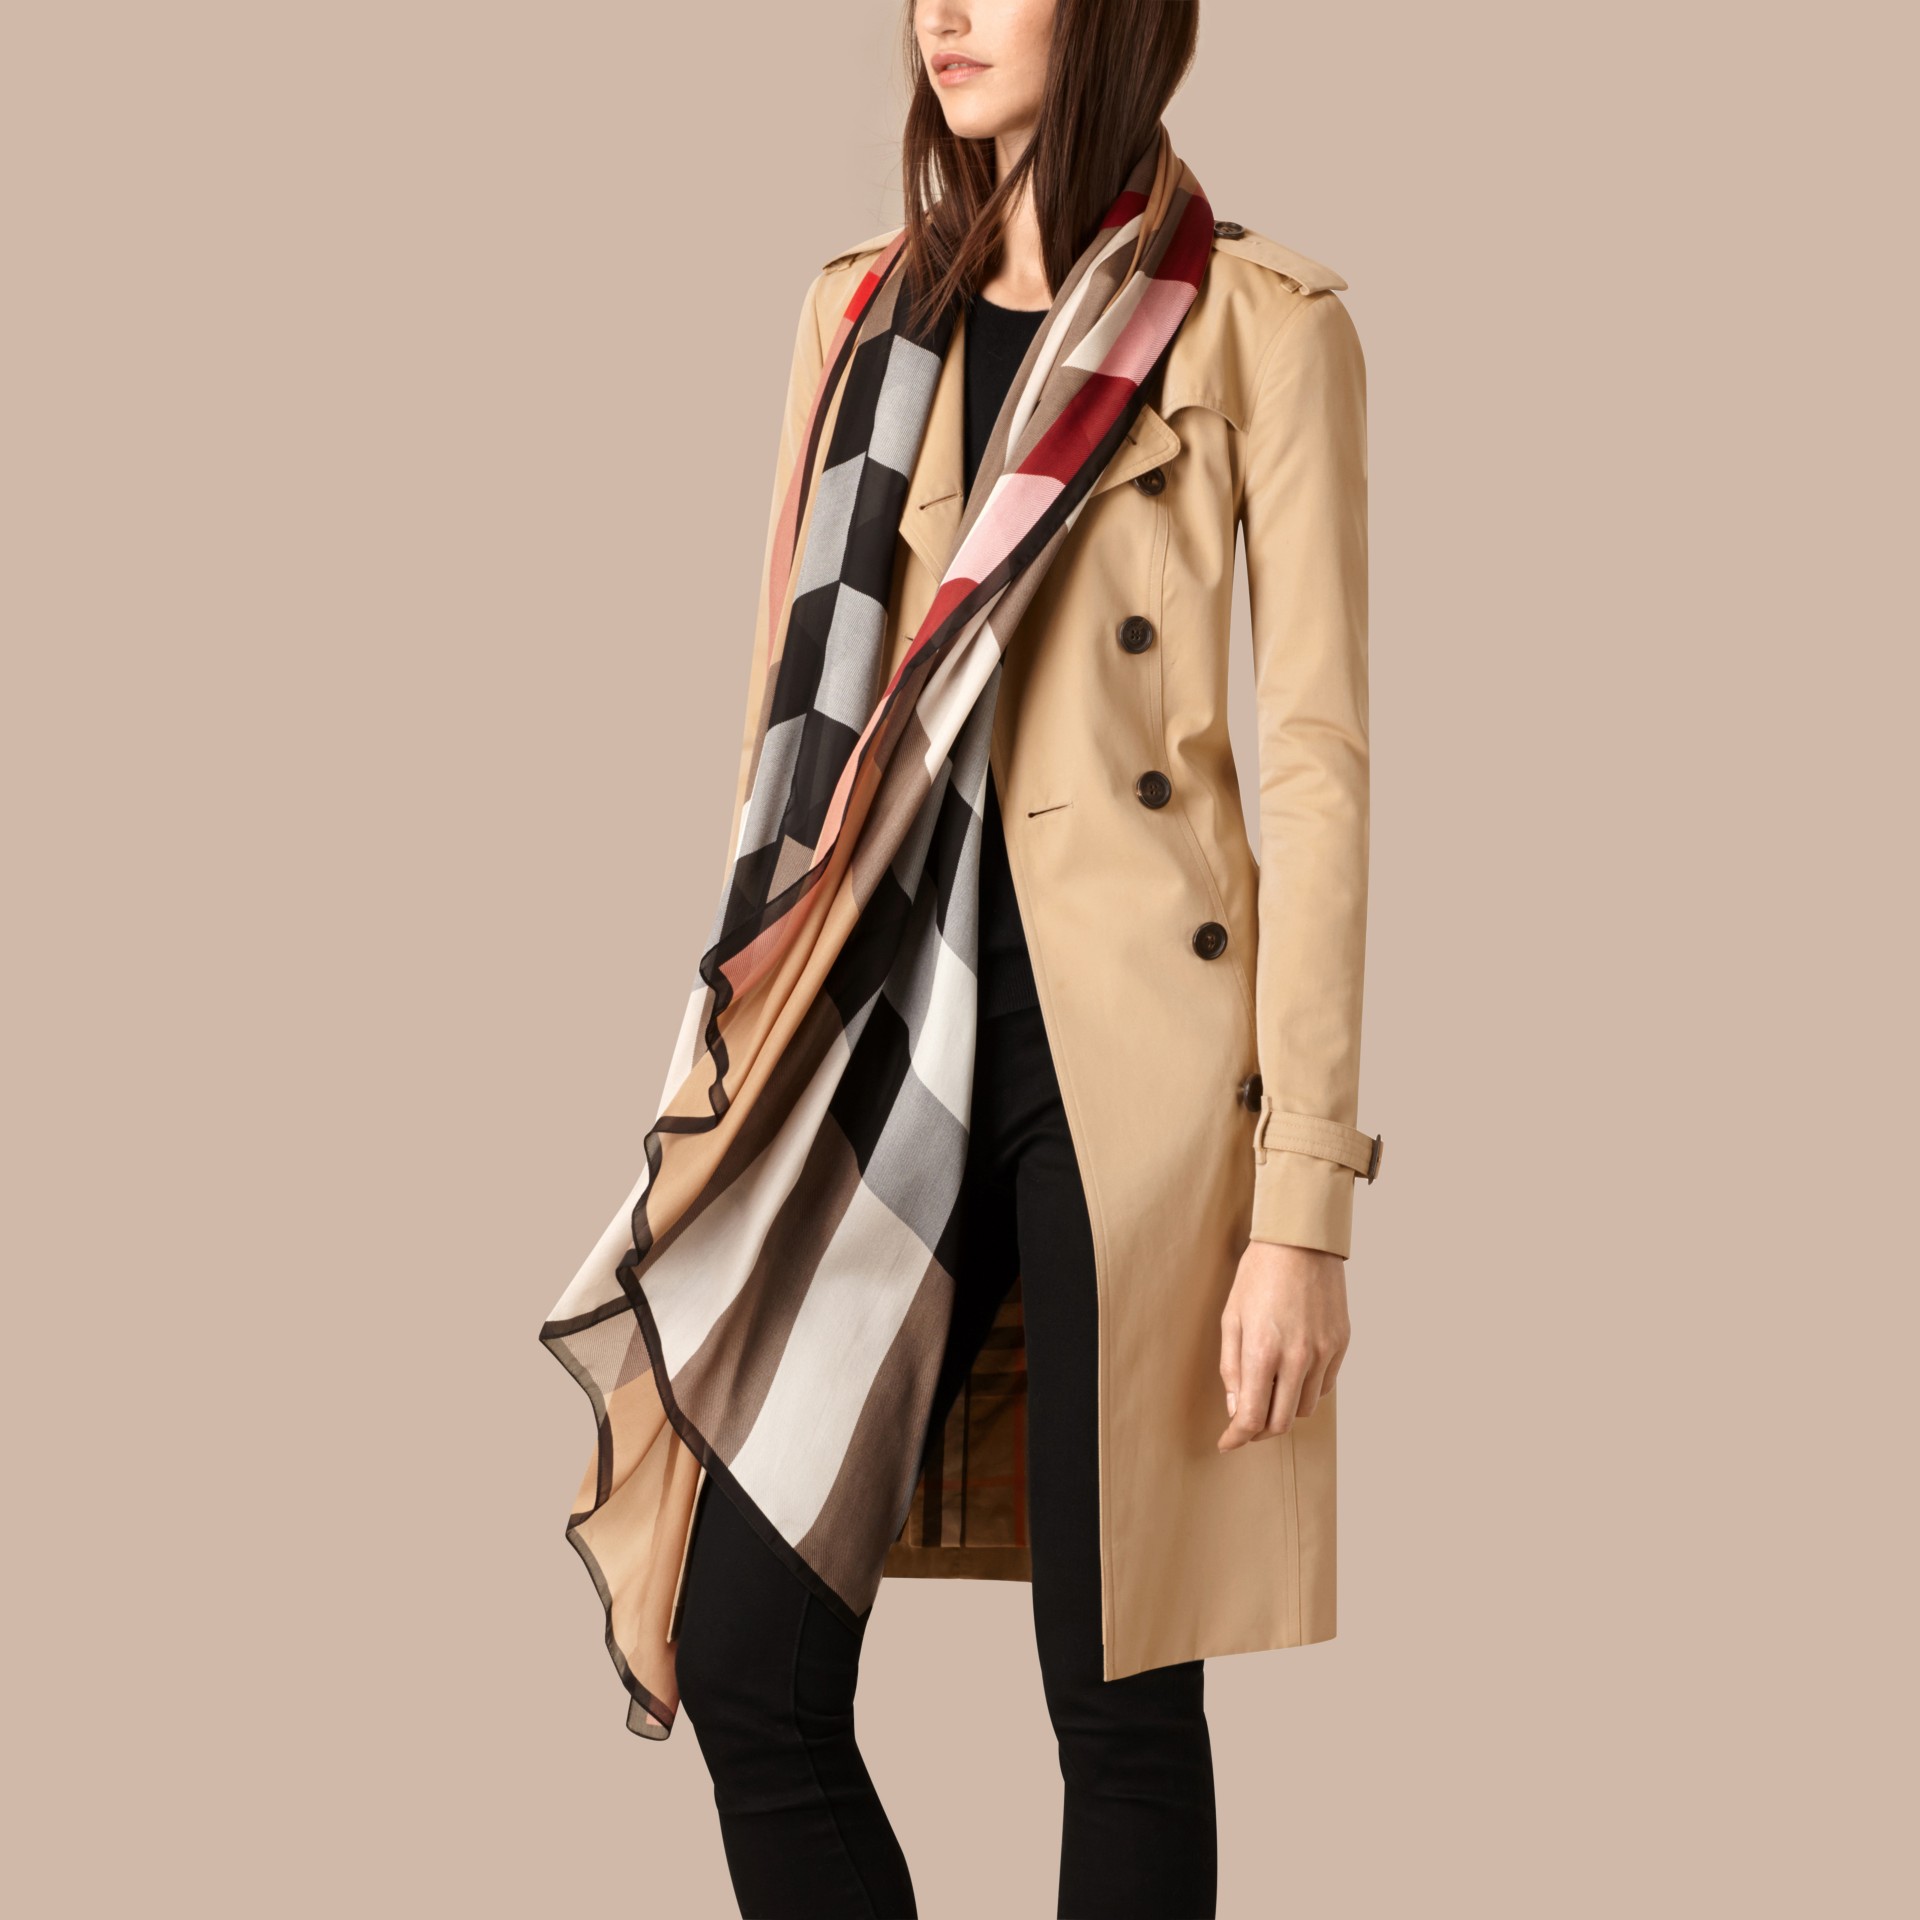 Lightweight Check Silk Scarf in Camel - Women | Burberry United States